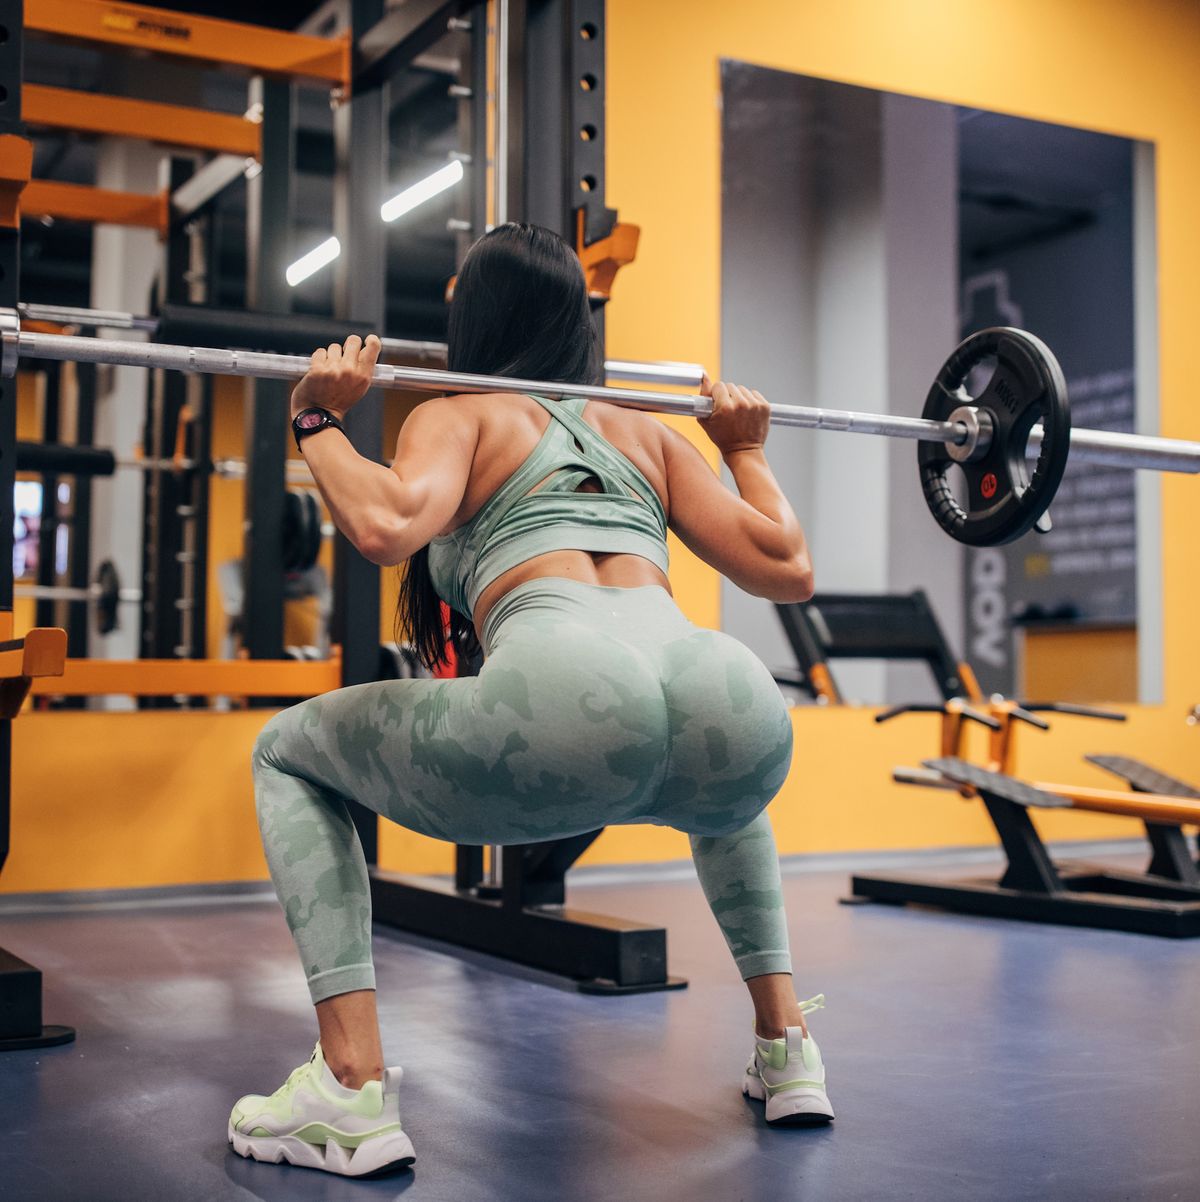 Bum exercises: Here's the best way to get a bigger booty